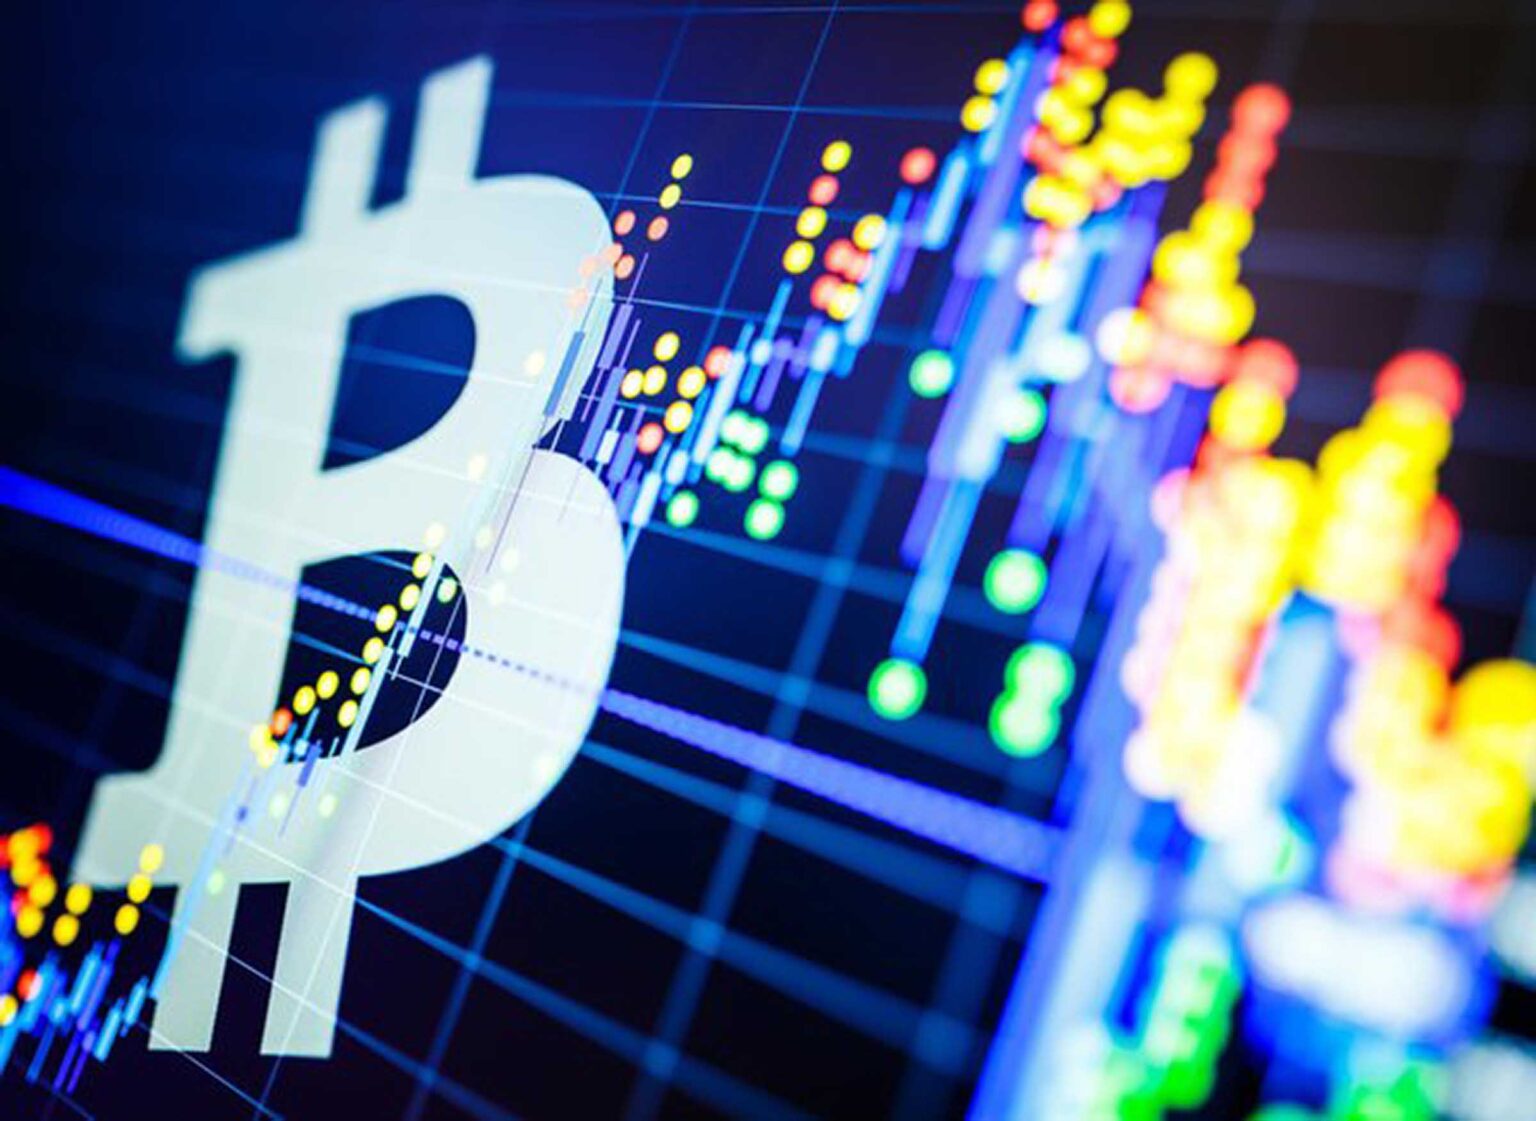 Cryptocurrency has been much maligned, however, many believe it has a bright future. Learn more about what's next for Bitcoin!